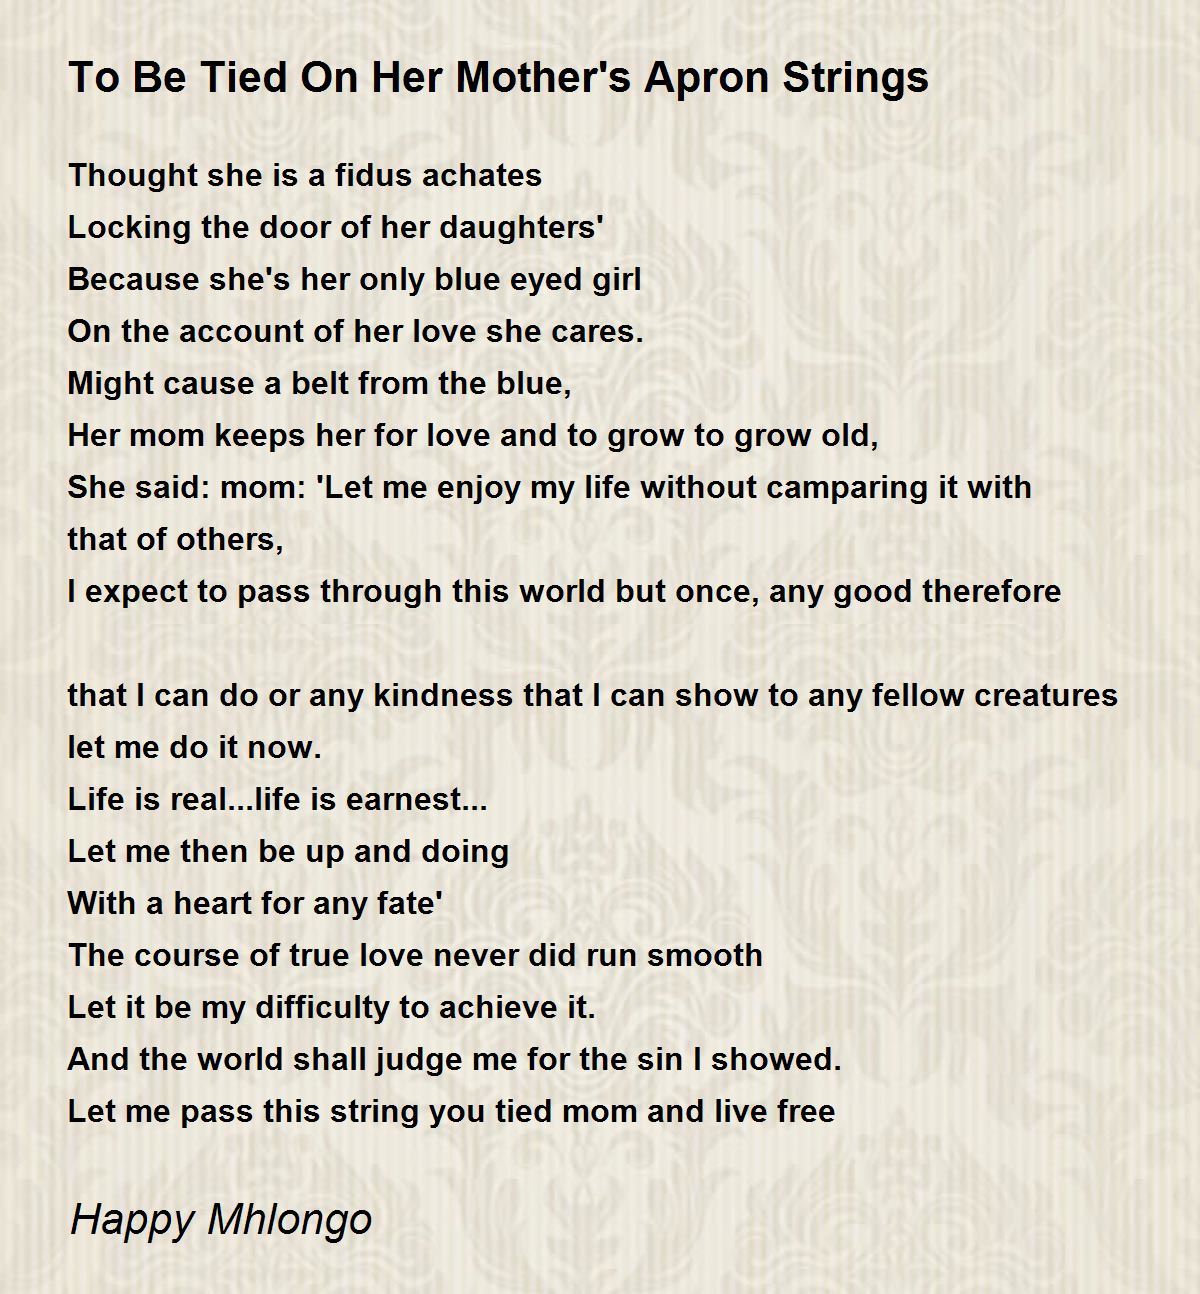 https://img.poemhunter.com/i/poem_images/557/to-be-tied-on-her-mother-s-apron-strings.jpg